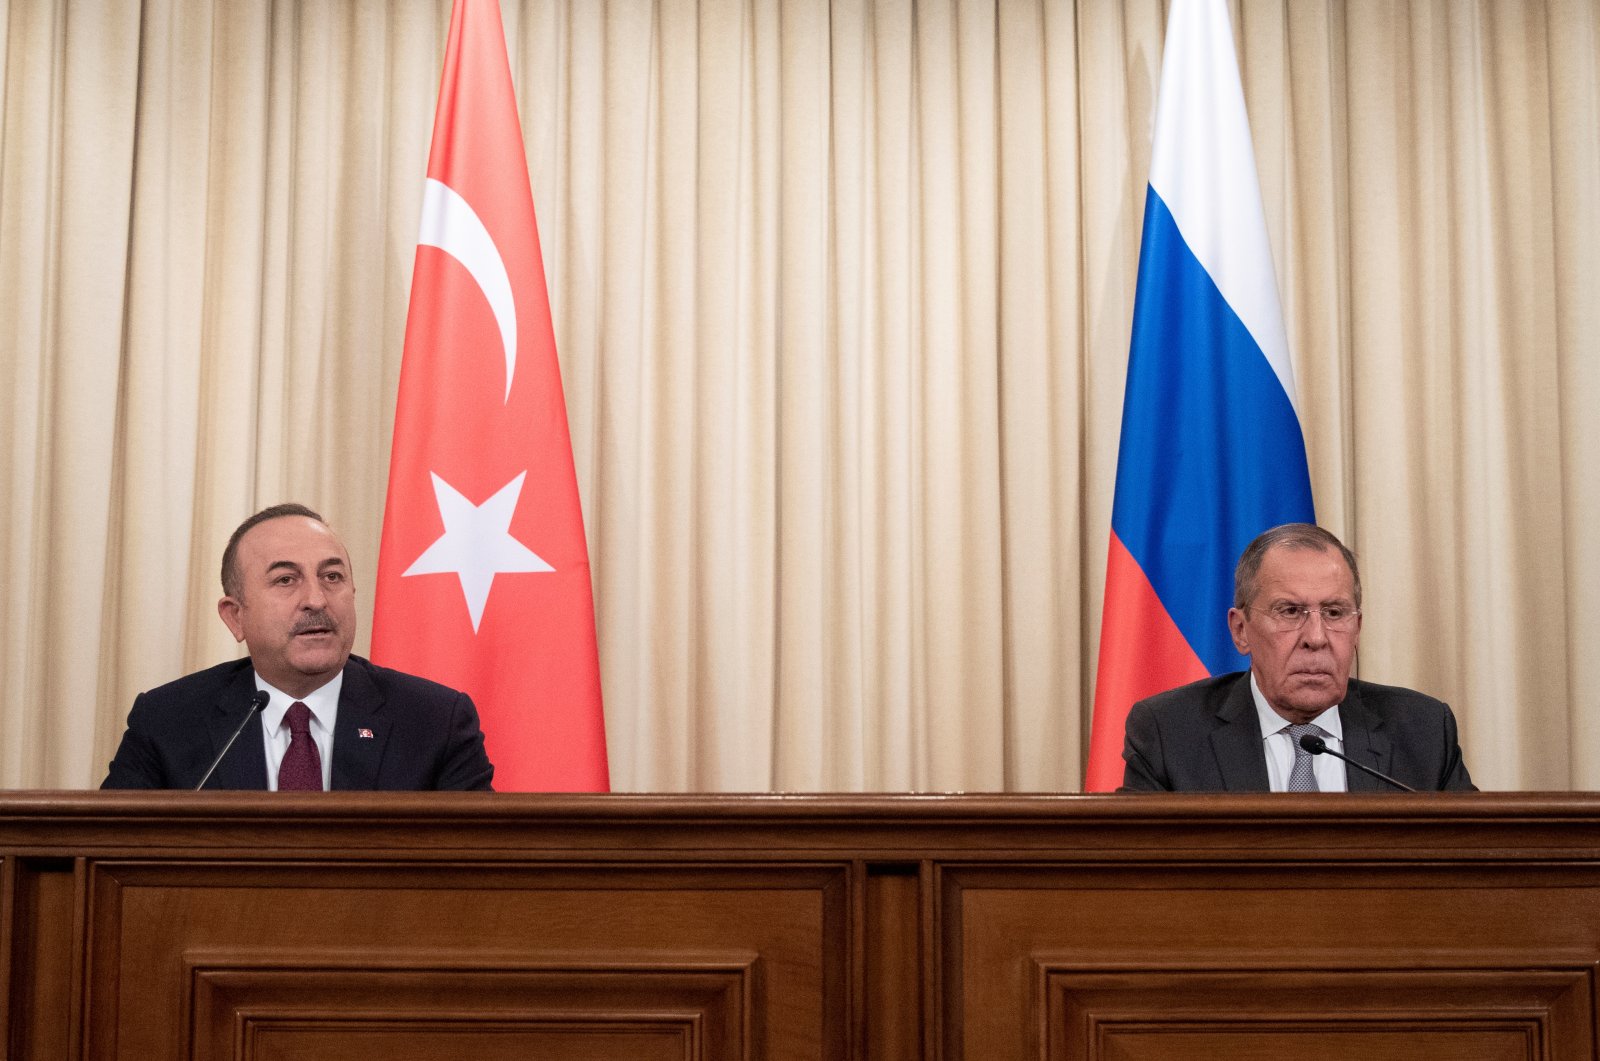 Foreign Minister Mevlüt Çavuşoğlu and his Russian counterpart Sergey Lavrov attend a joint news conference following their talks in Moscow, Russia, Jan. 13, 2020. (Reuters Photo)